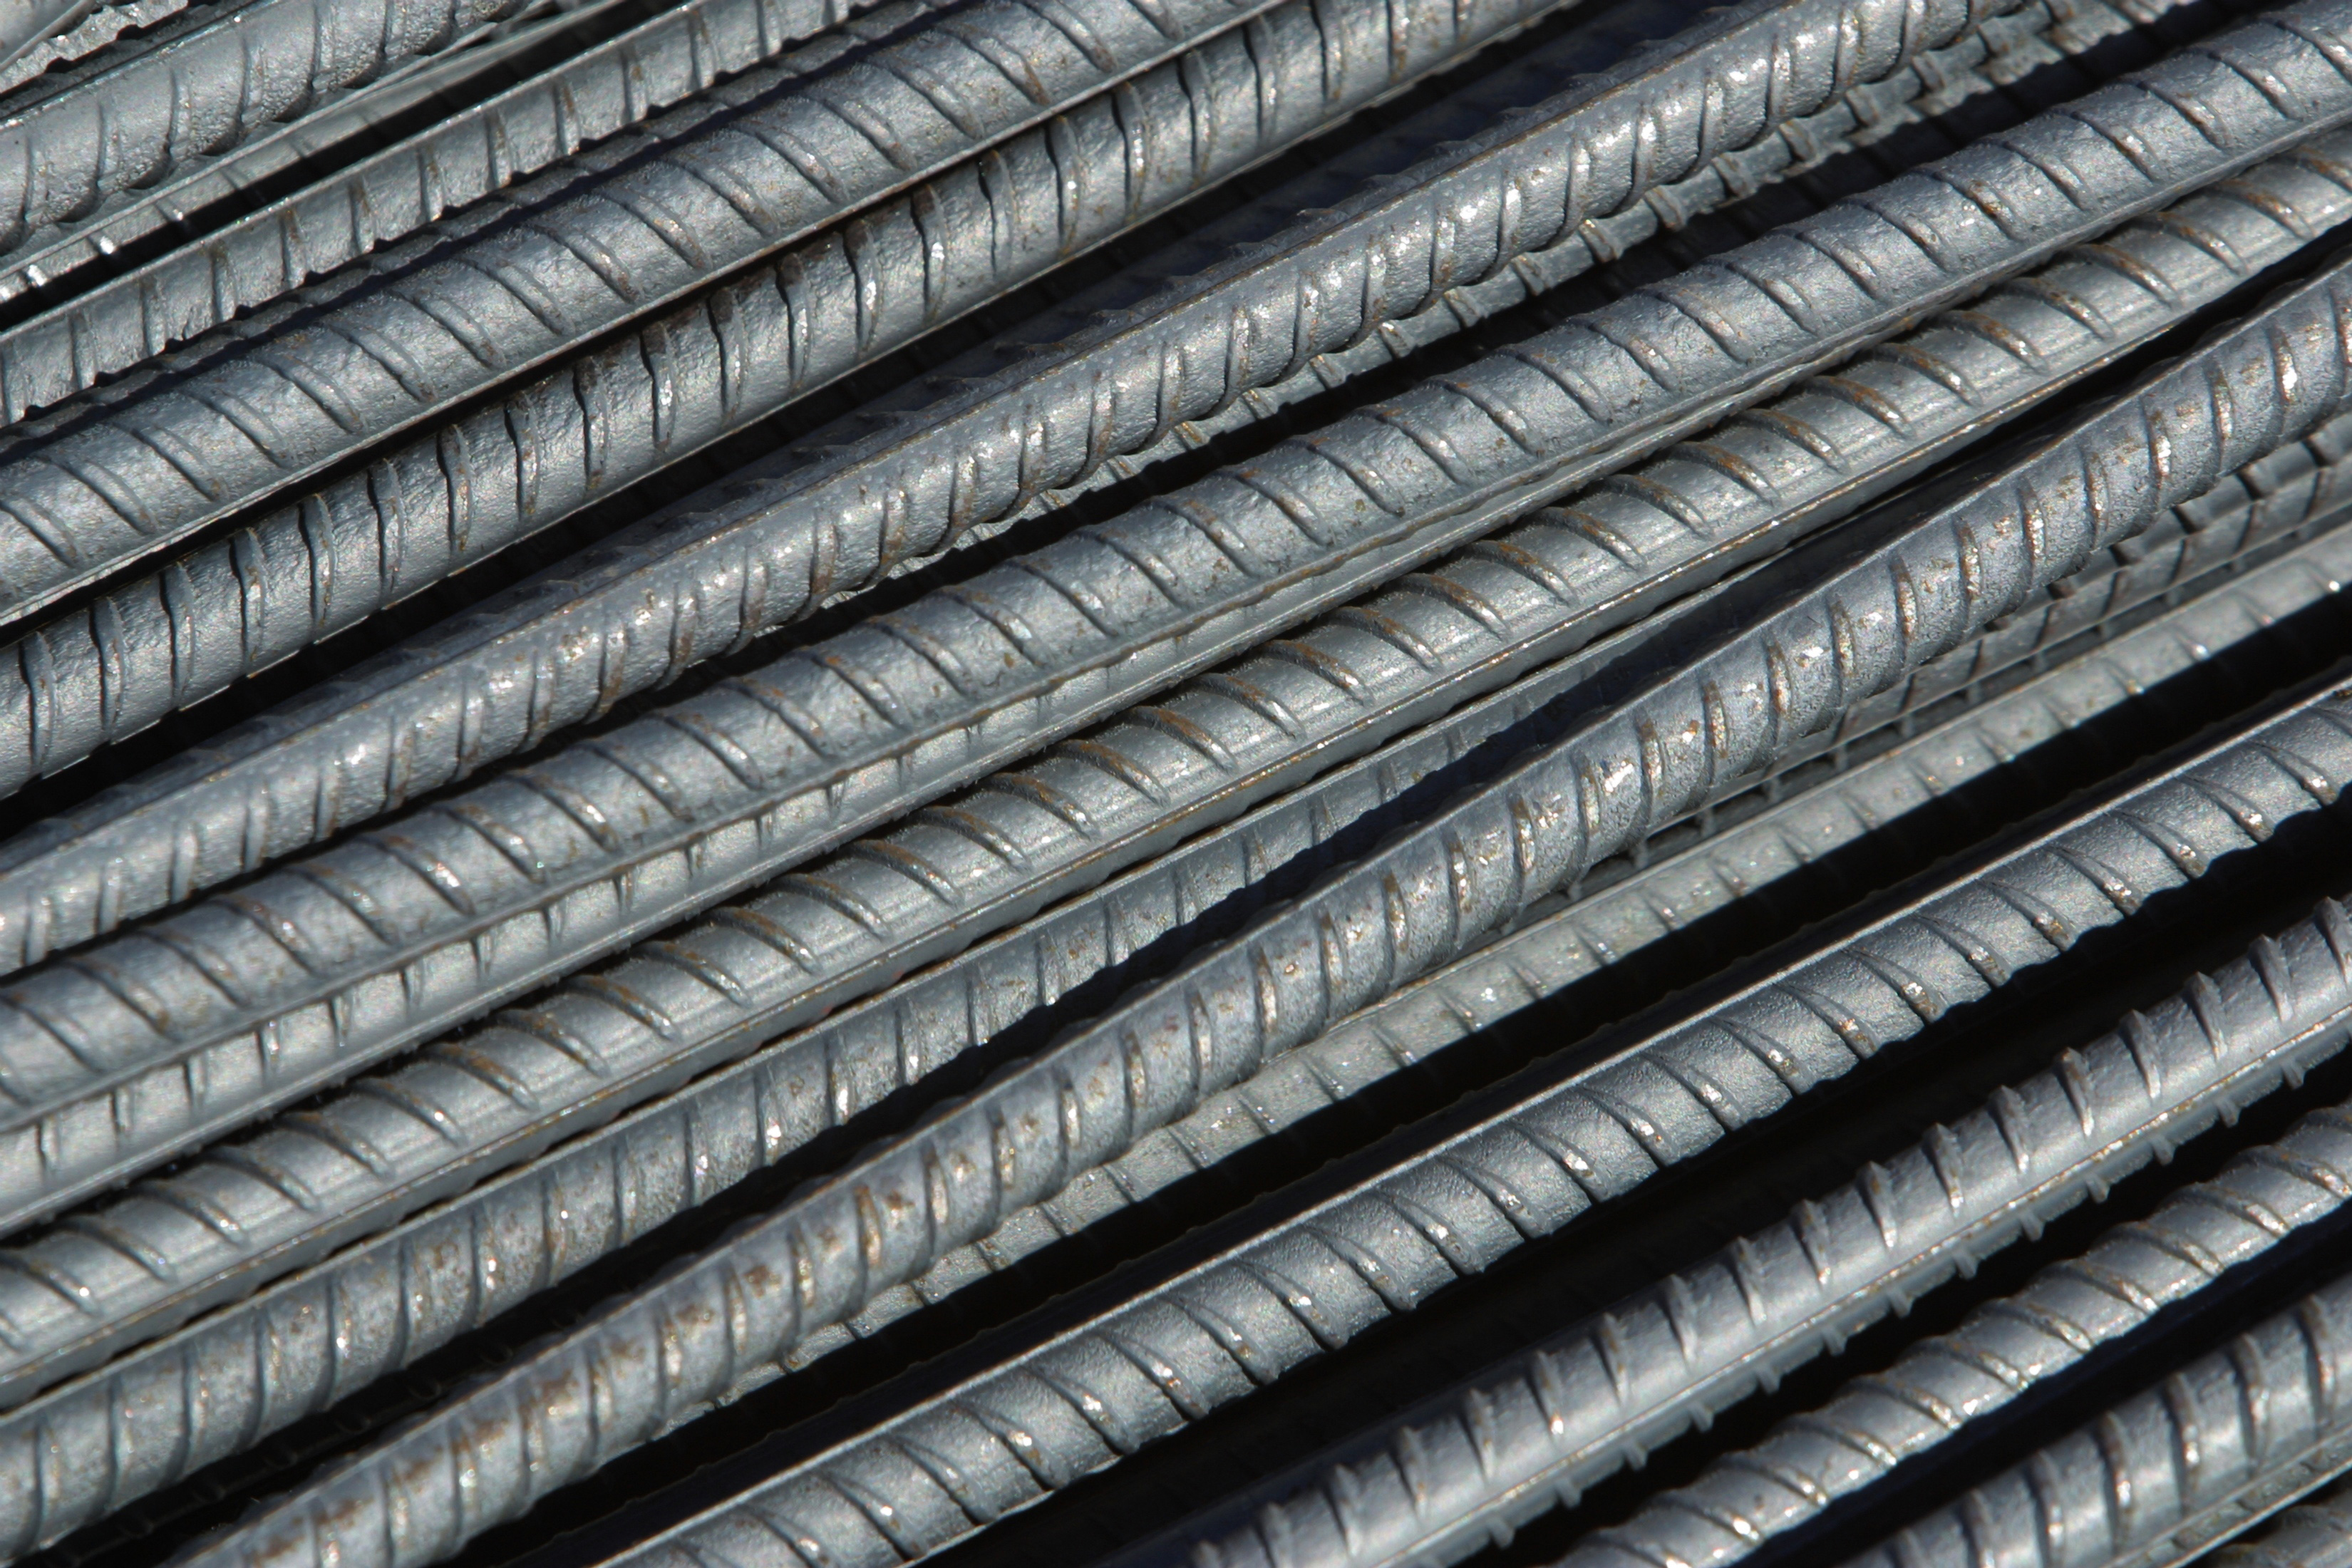 Reinforcing Bars - Re-Steel Supply Company, Inc.